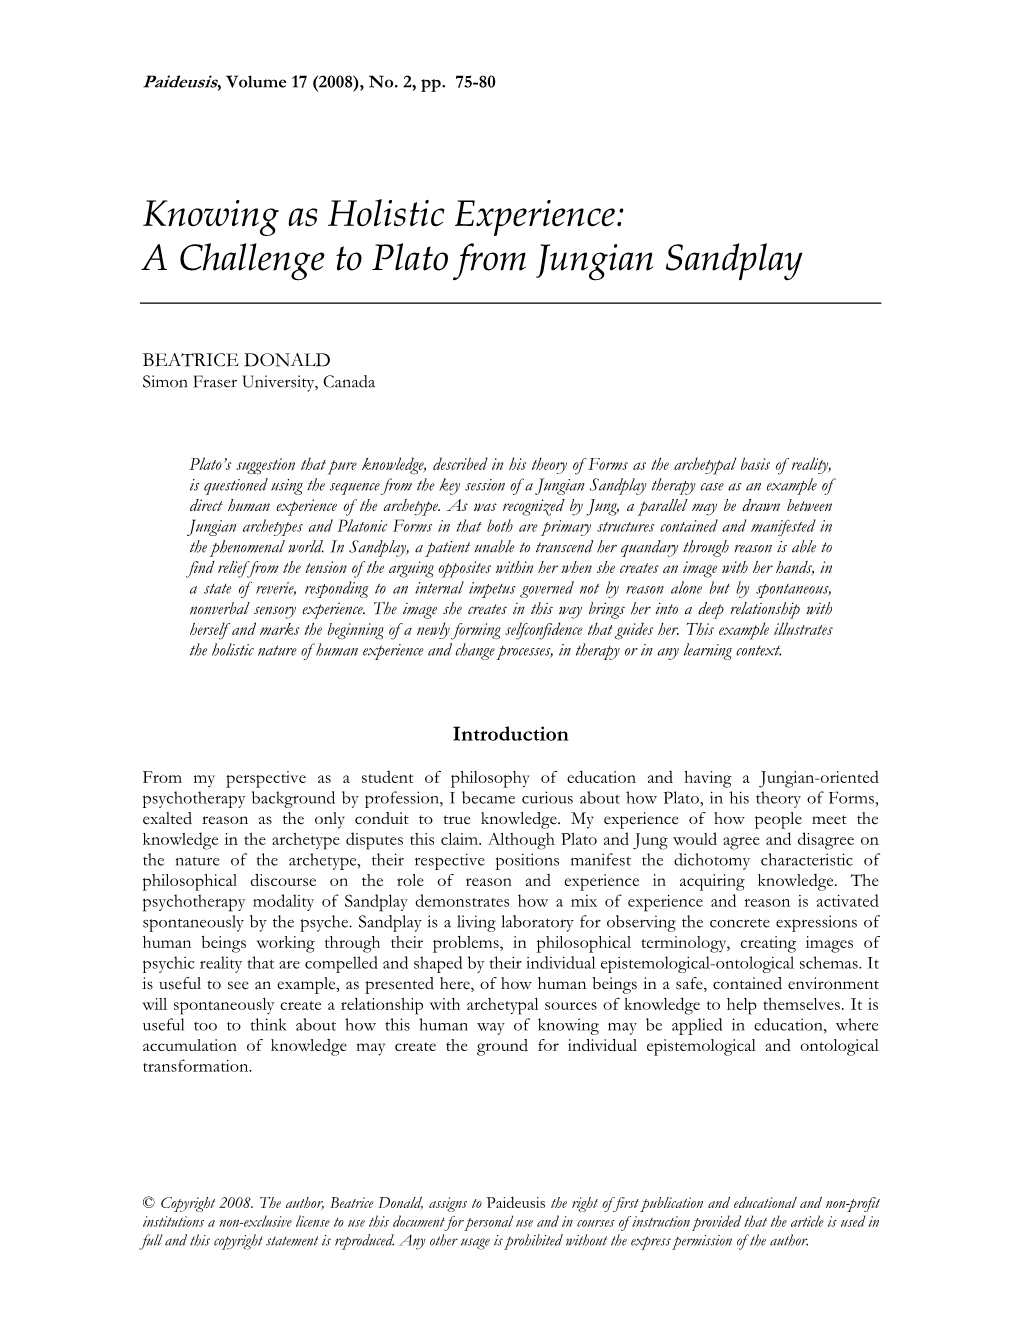 Knowing As Holistic Experience: a Challenge to Plato from Jungian Sandplay